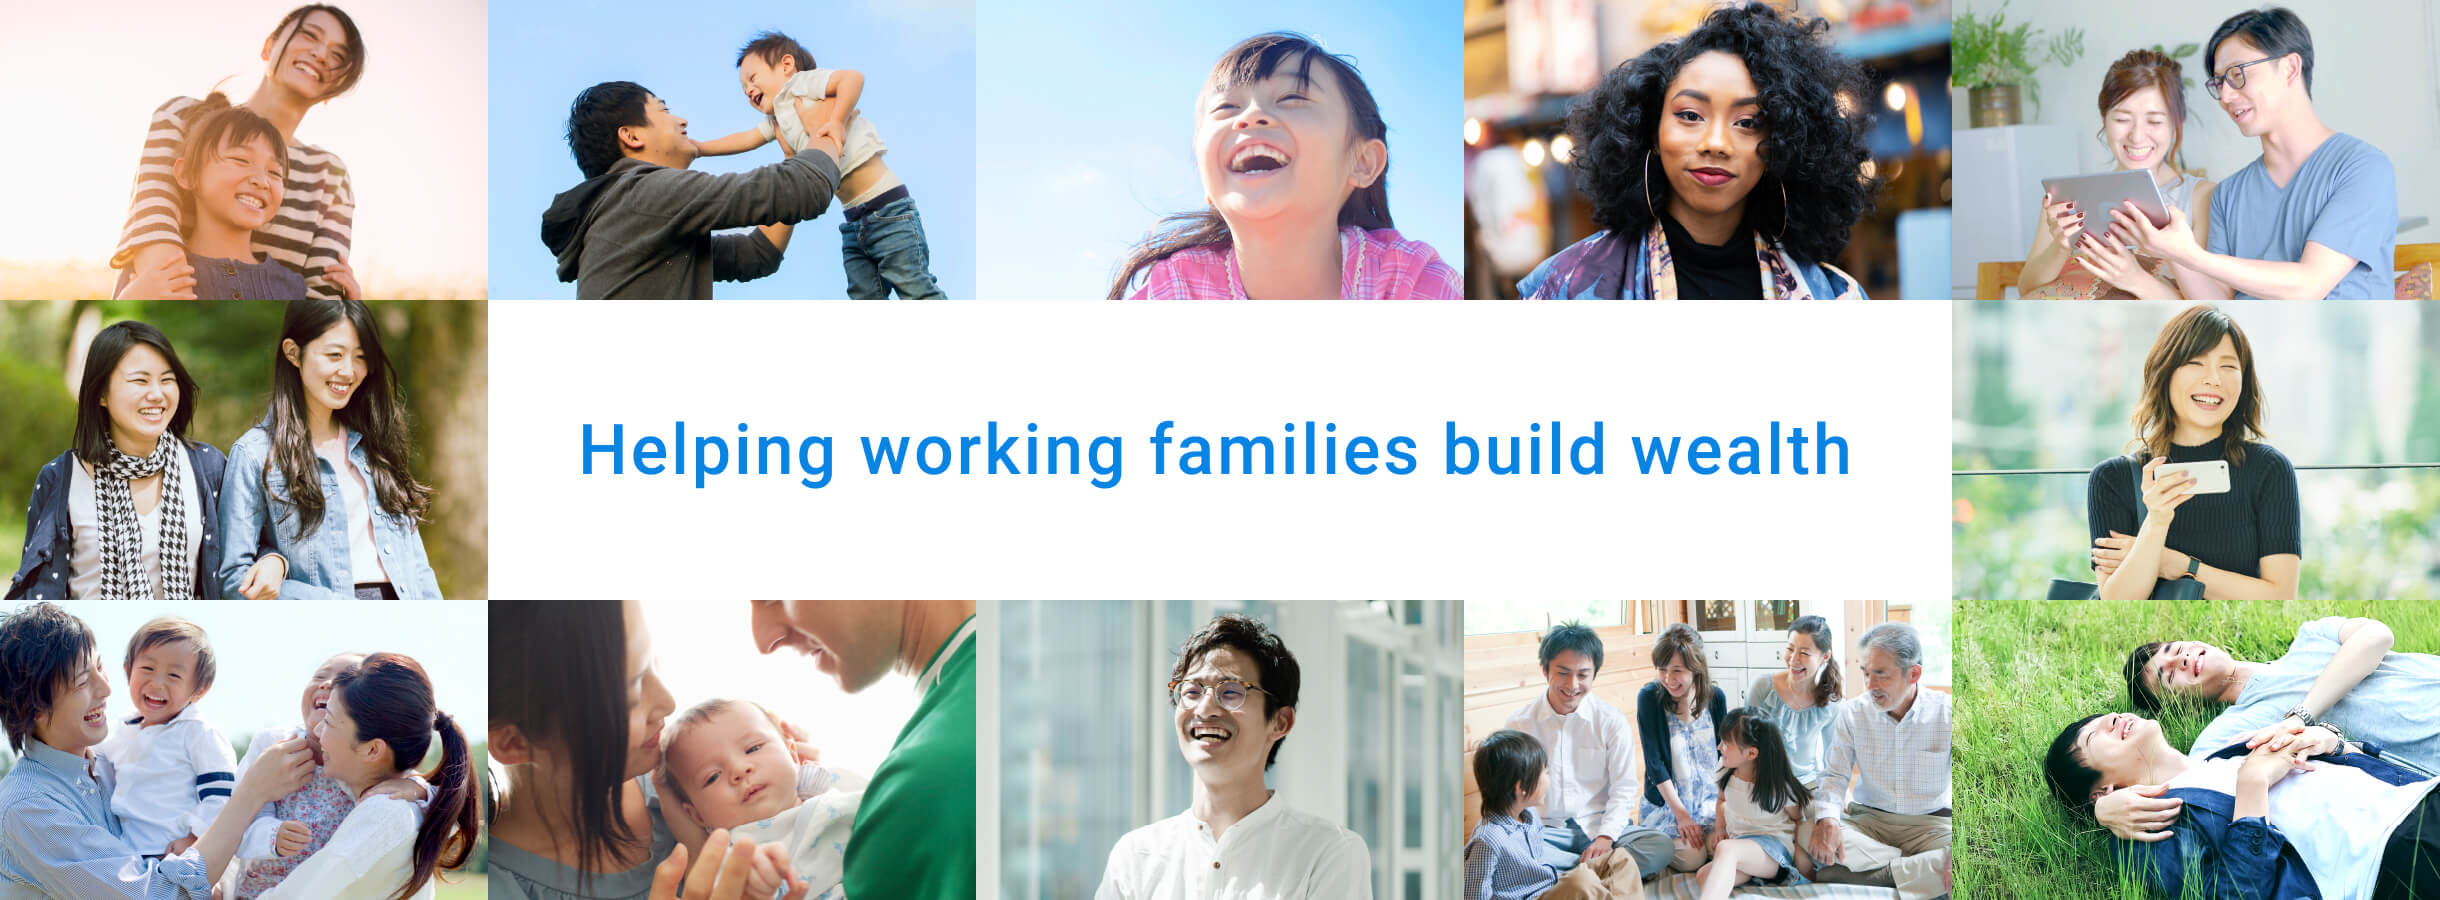 To build a world-class wealth management platform for working families using cutting-edge technology